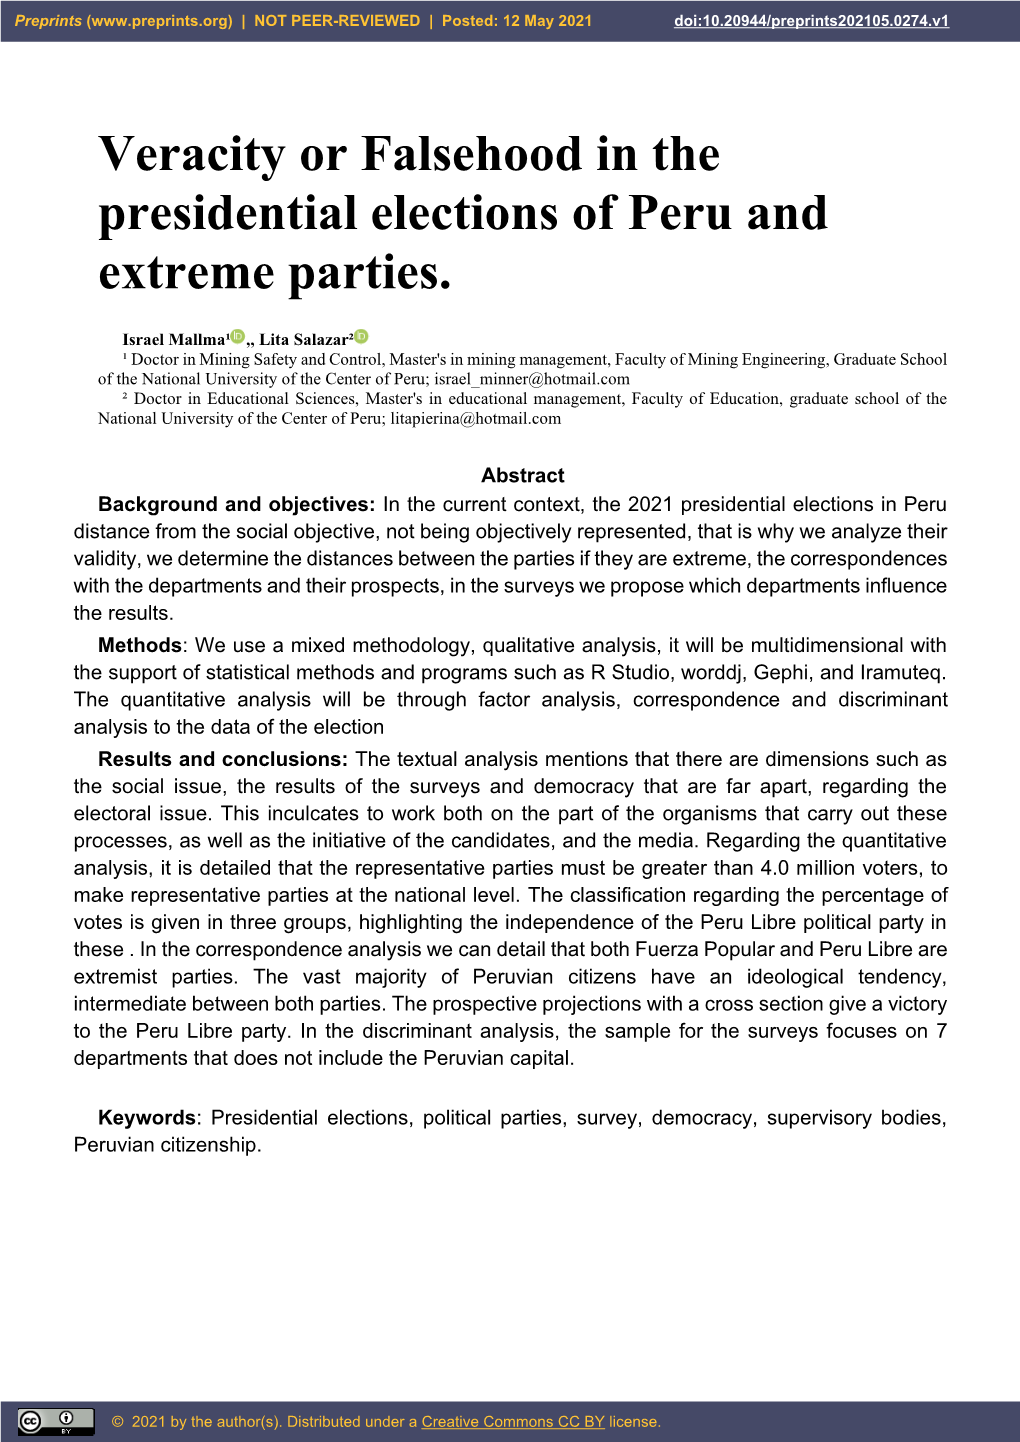 Veracity Or Falsehood in the Presidential Elections of Peru and Extreme Parties